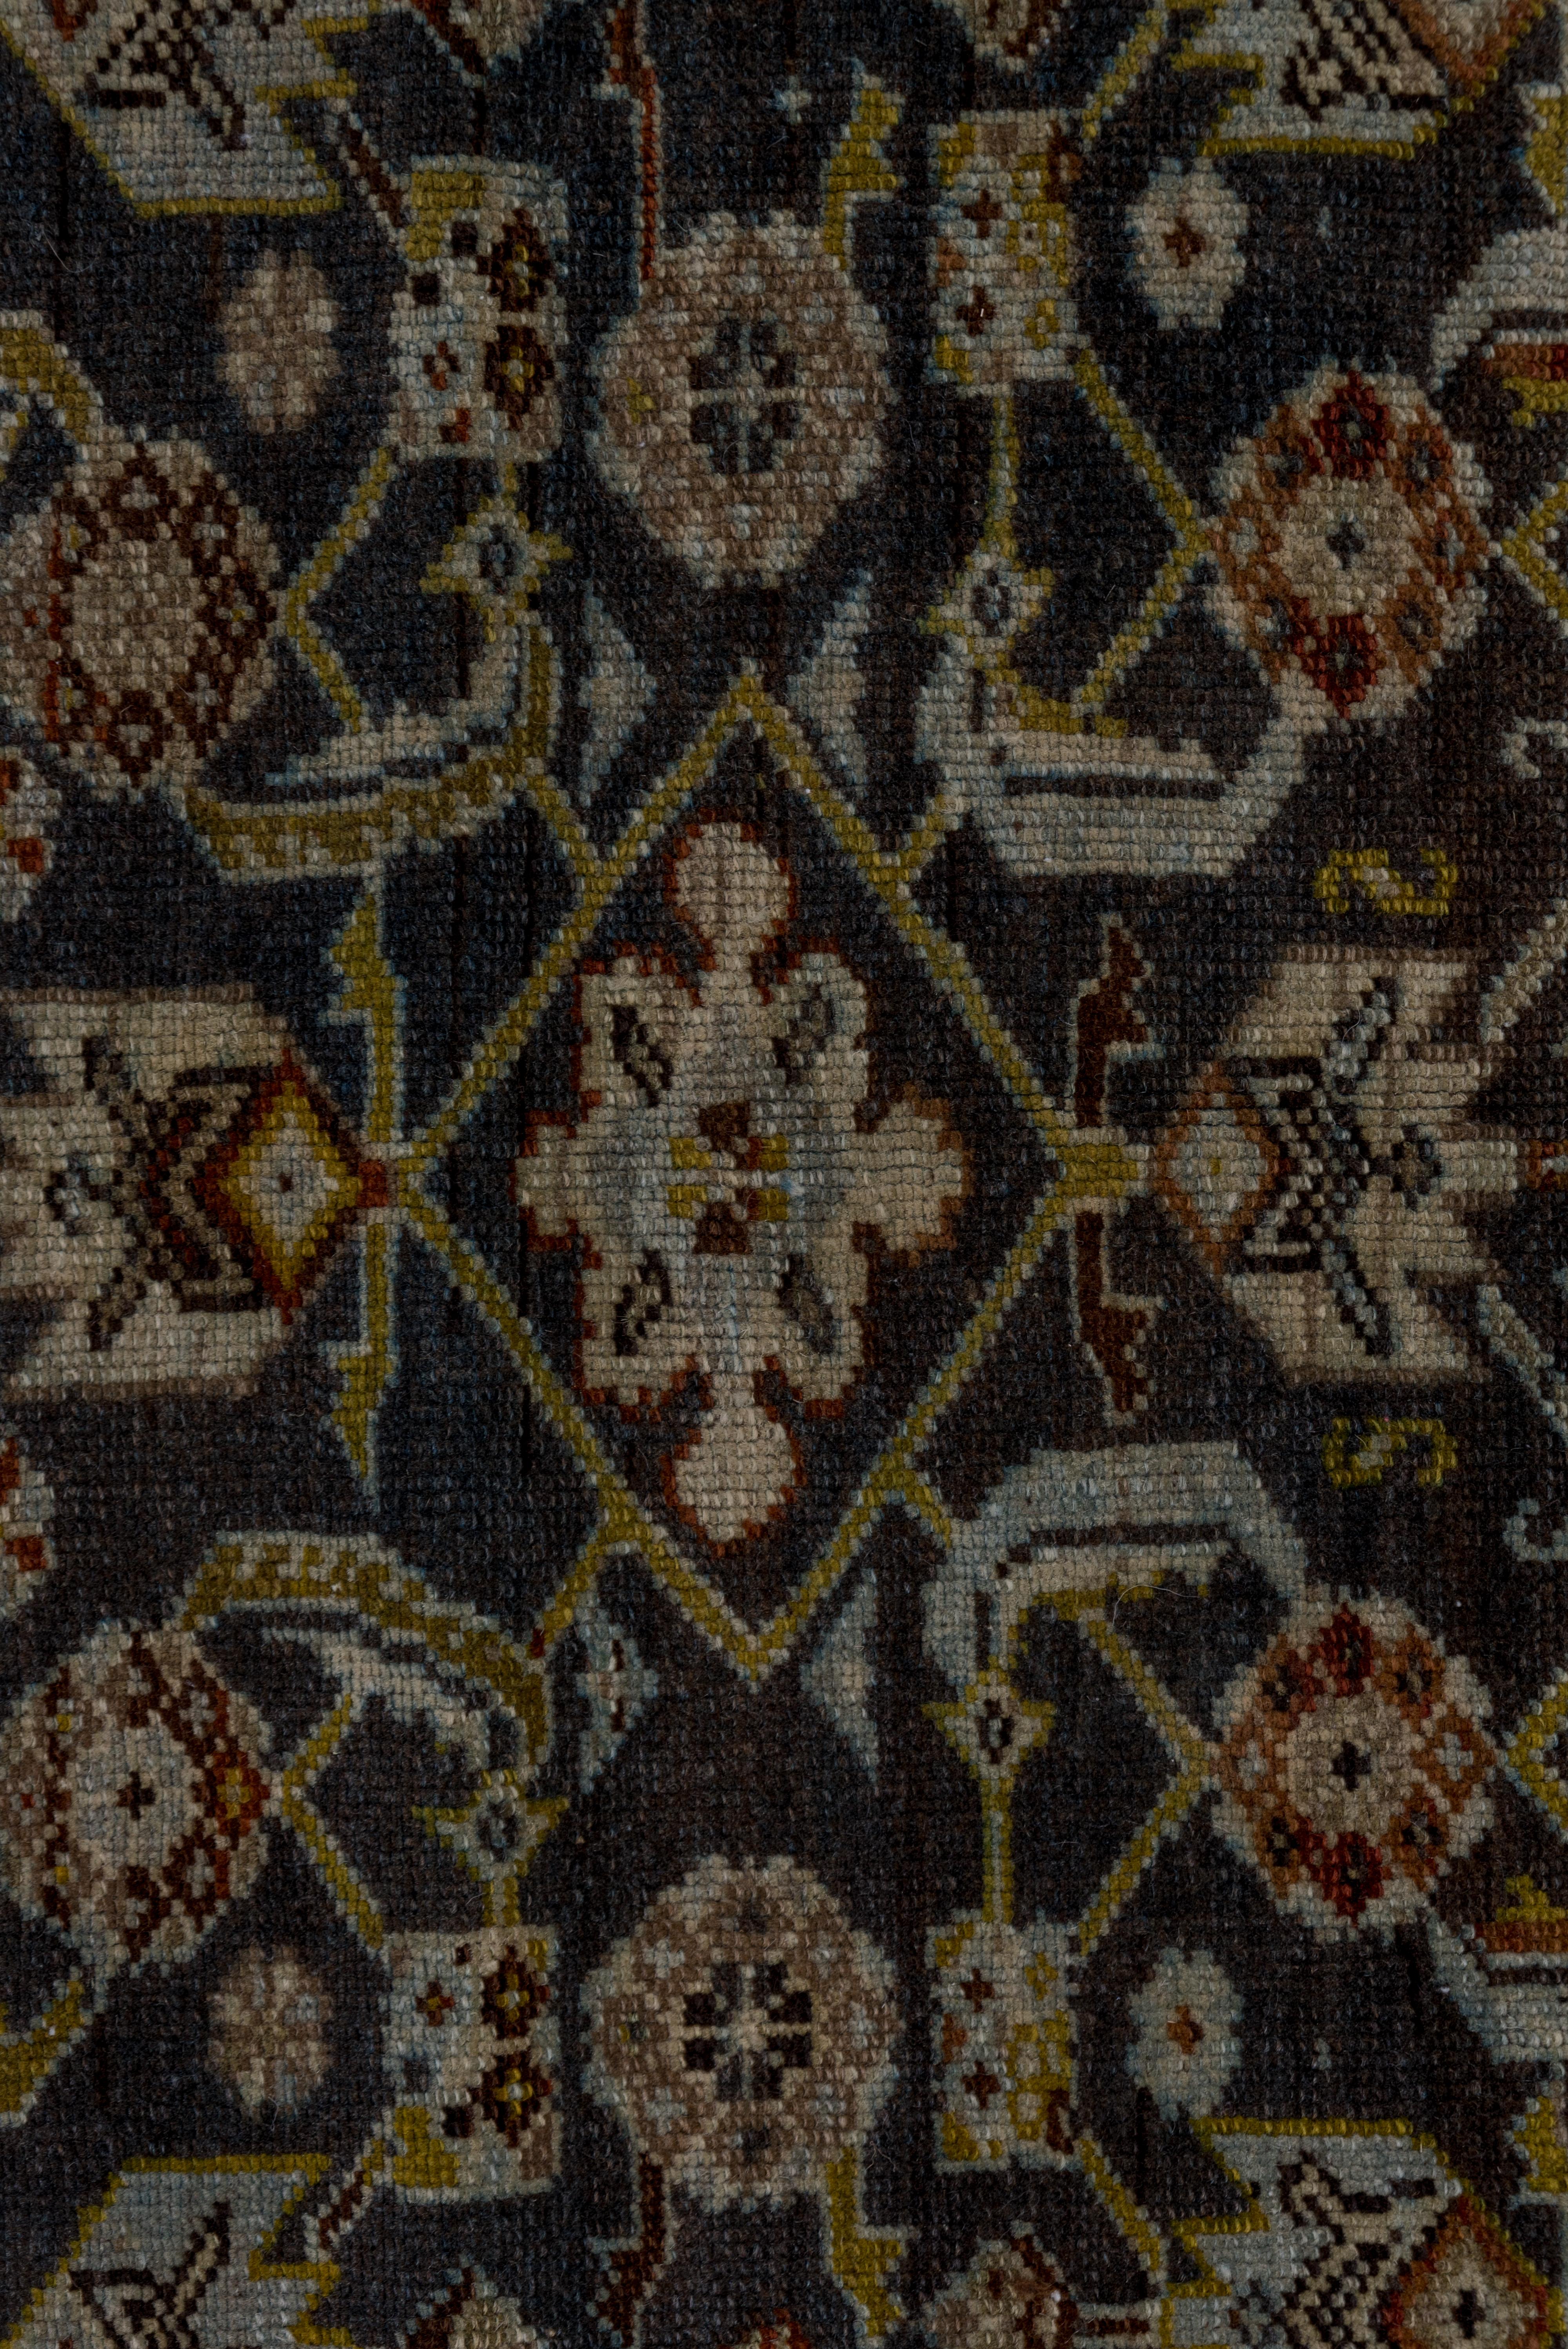 This characteristic west Persian rustic runner displays a single column Herati design on a noticeably abrashed brown field. The palmettes are schematically drawn and the diamonds are flattened with snowflake rosette fillers. The ivory main border